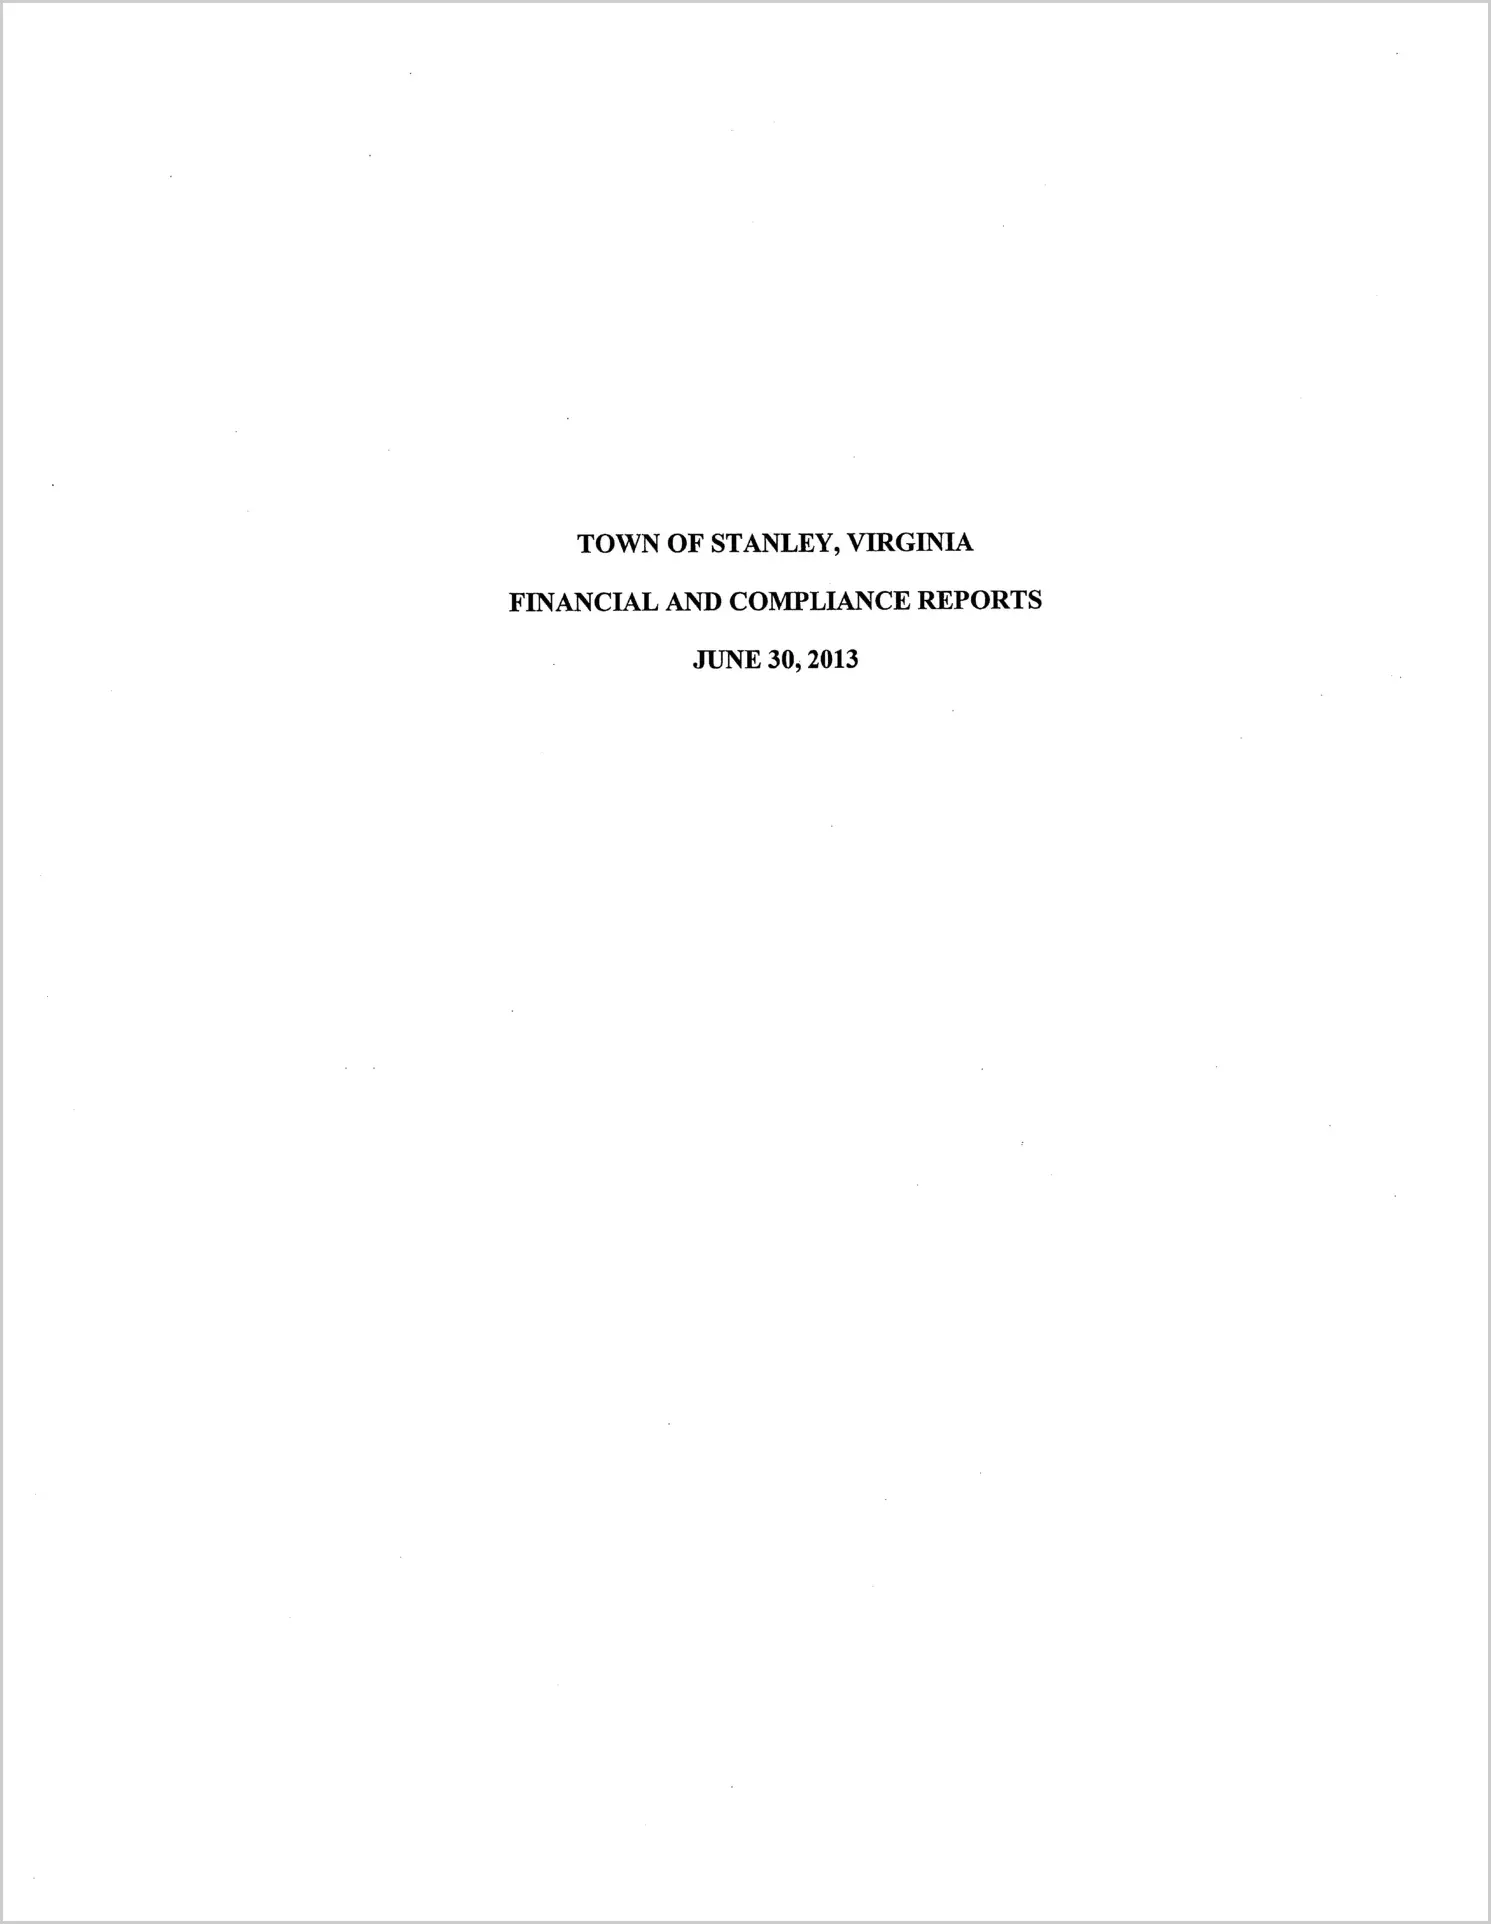 2013 Annual Financial Report for Town of Stanley